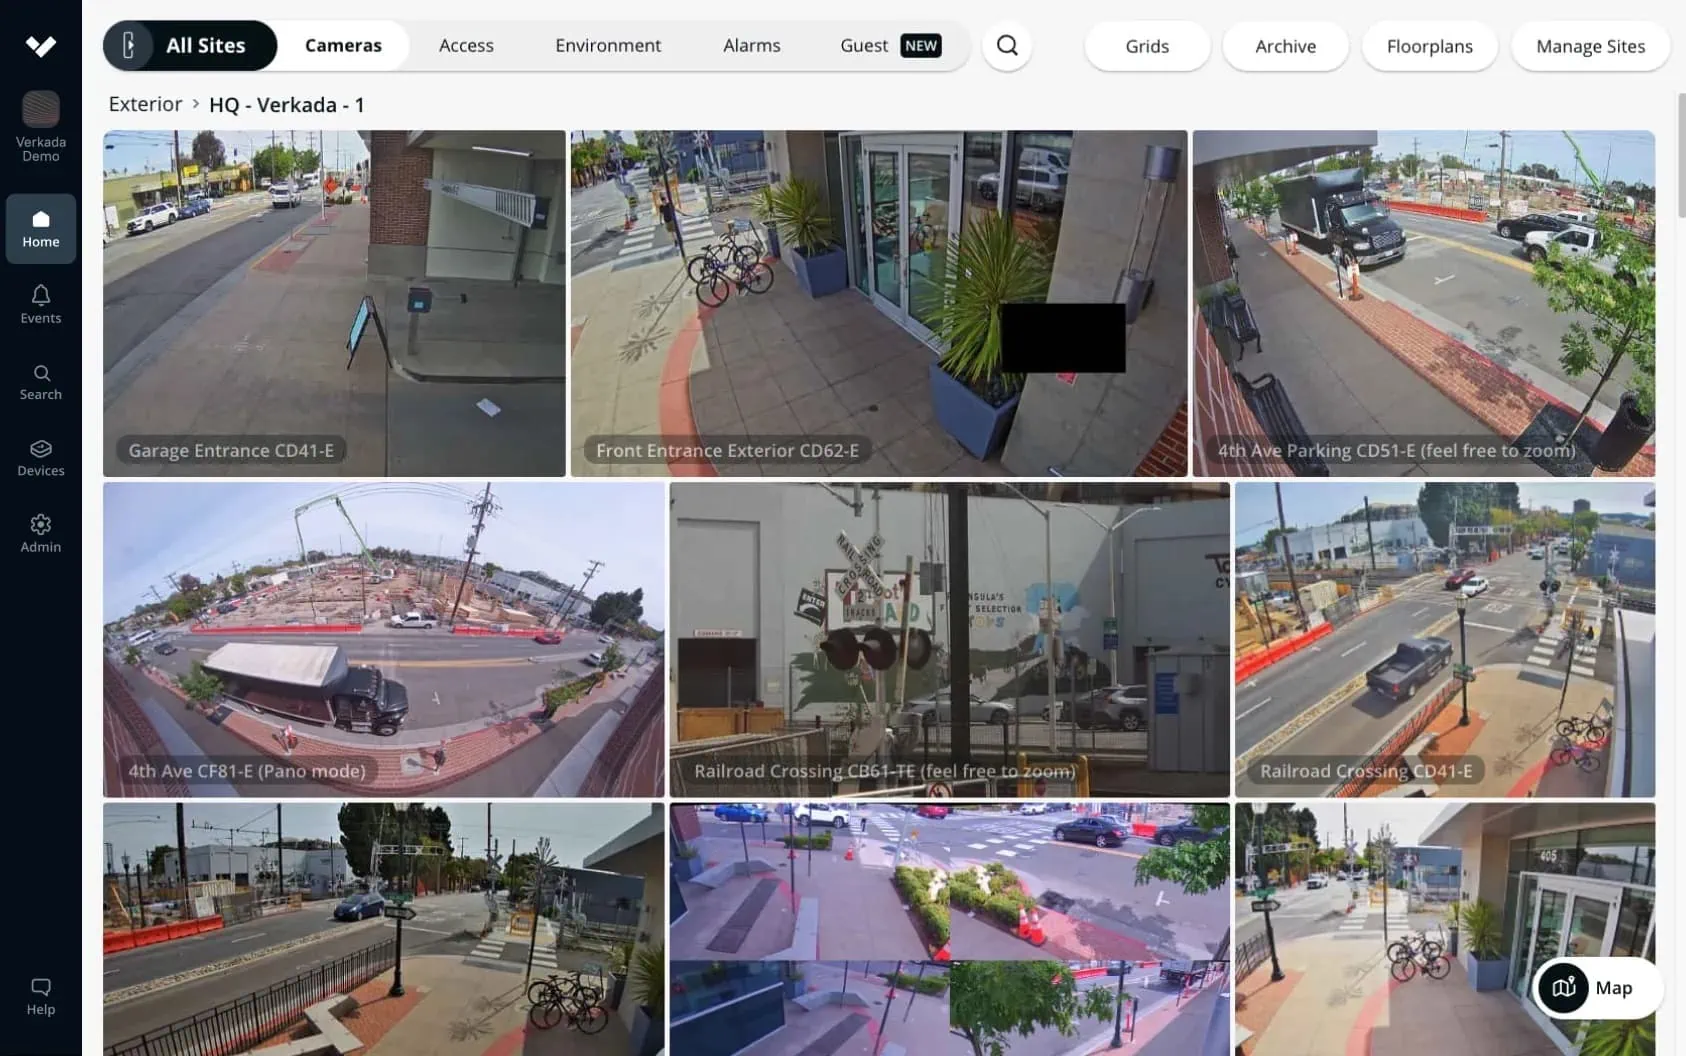 Remote monitoring with a construction security camera